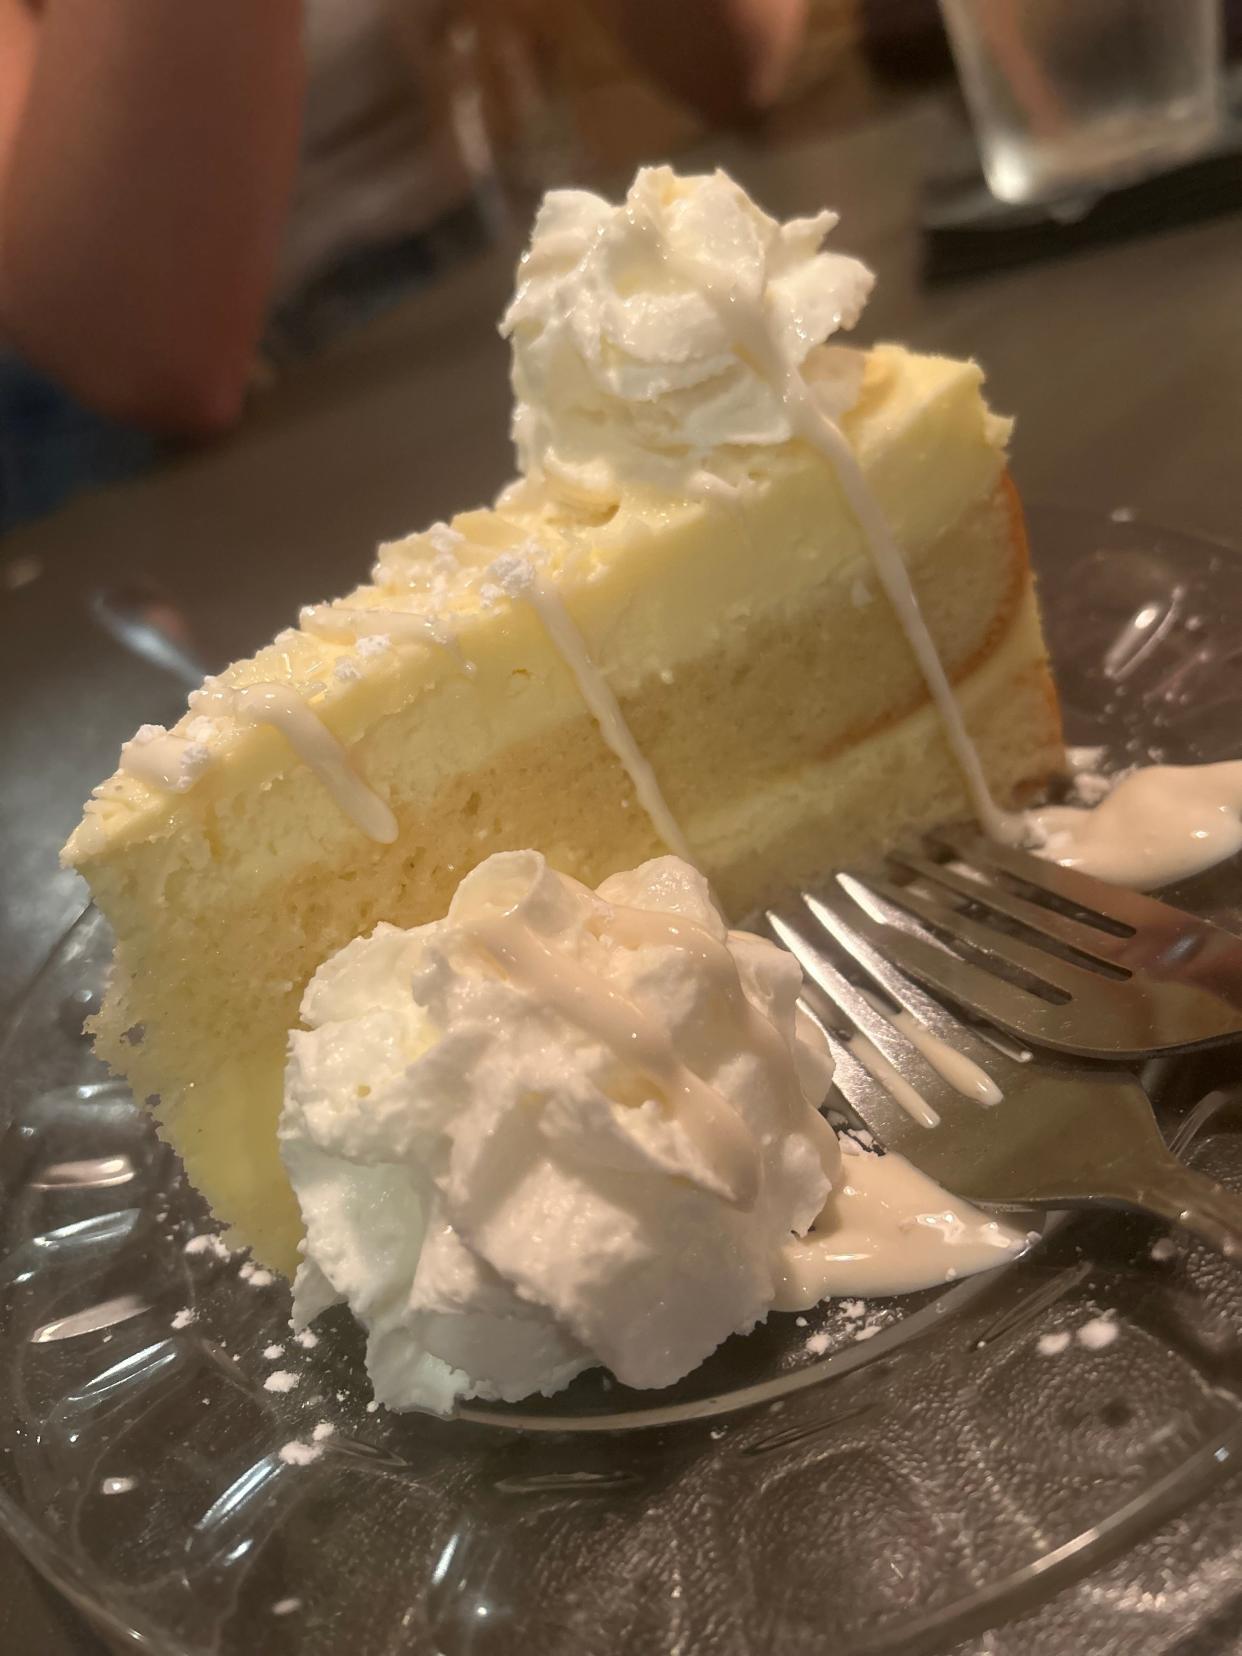 Lemon mascarpone cake is one of four desserts offered recently at the family-owned Santosuosso's Italian restaurant in Medina Township.